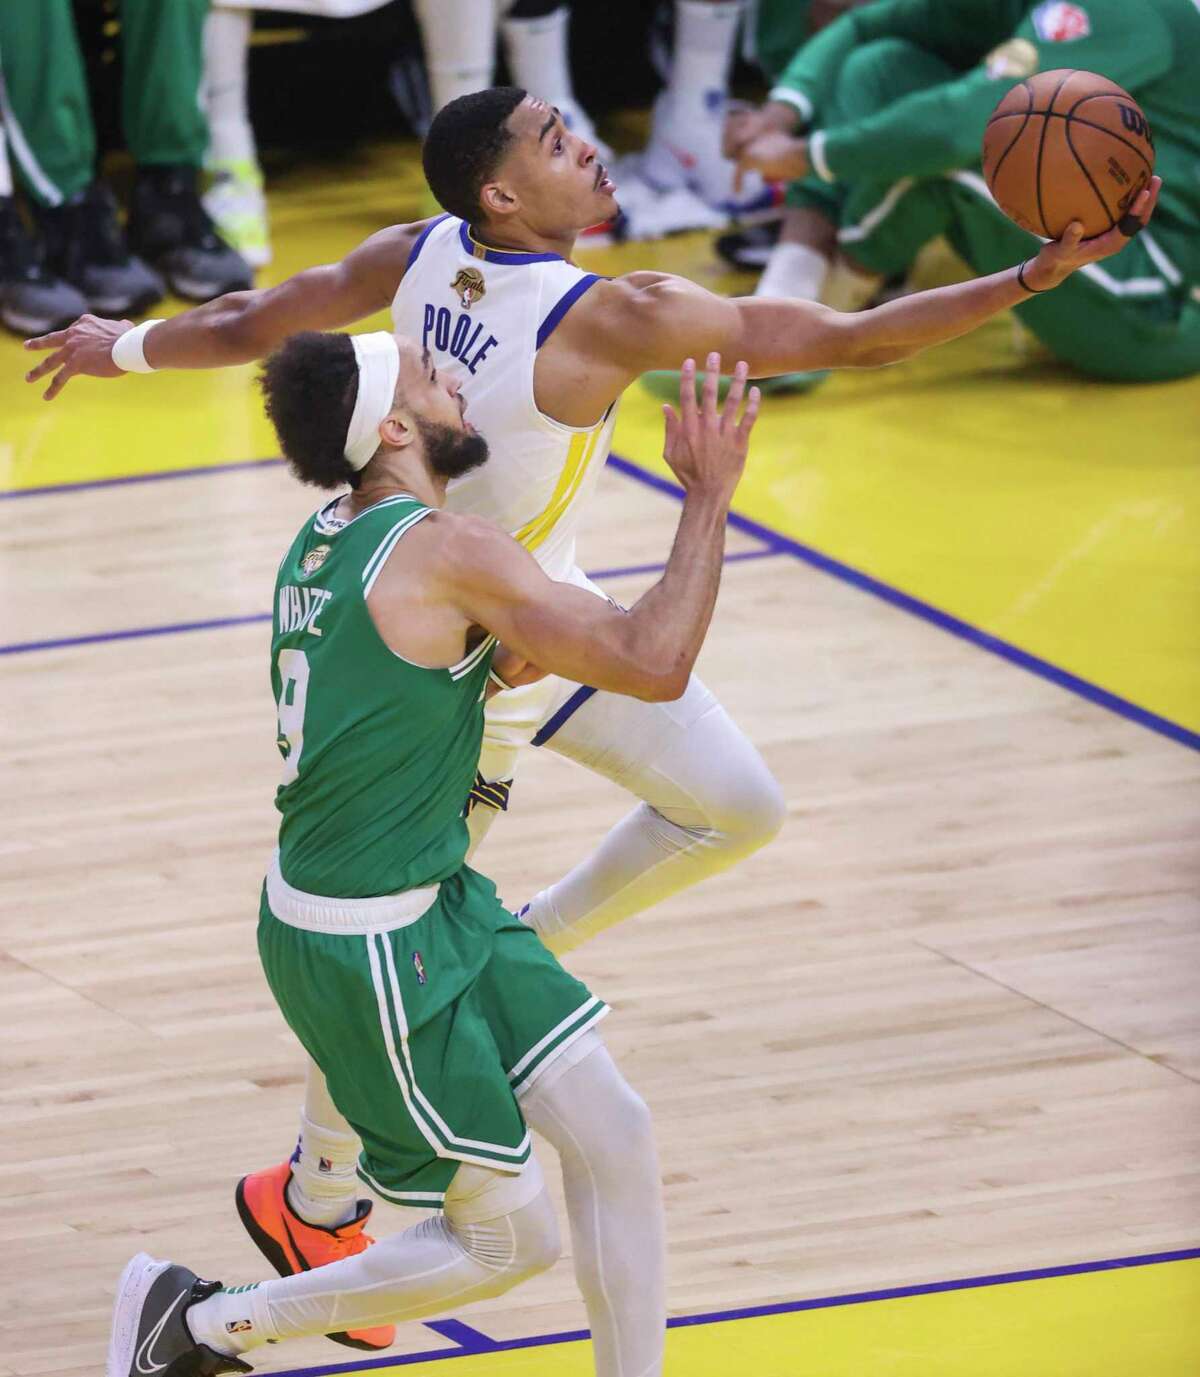 Golden State Warriors' Jordan Poole, 3, gets past Boston Celtics' Derrick White, 9, during the second quarter of the NBA Finals at Chase Center in San Francisco, Calif., on Sunday, June 5, 2022.